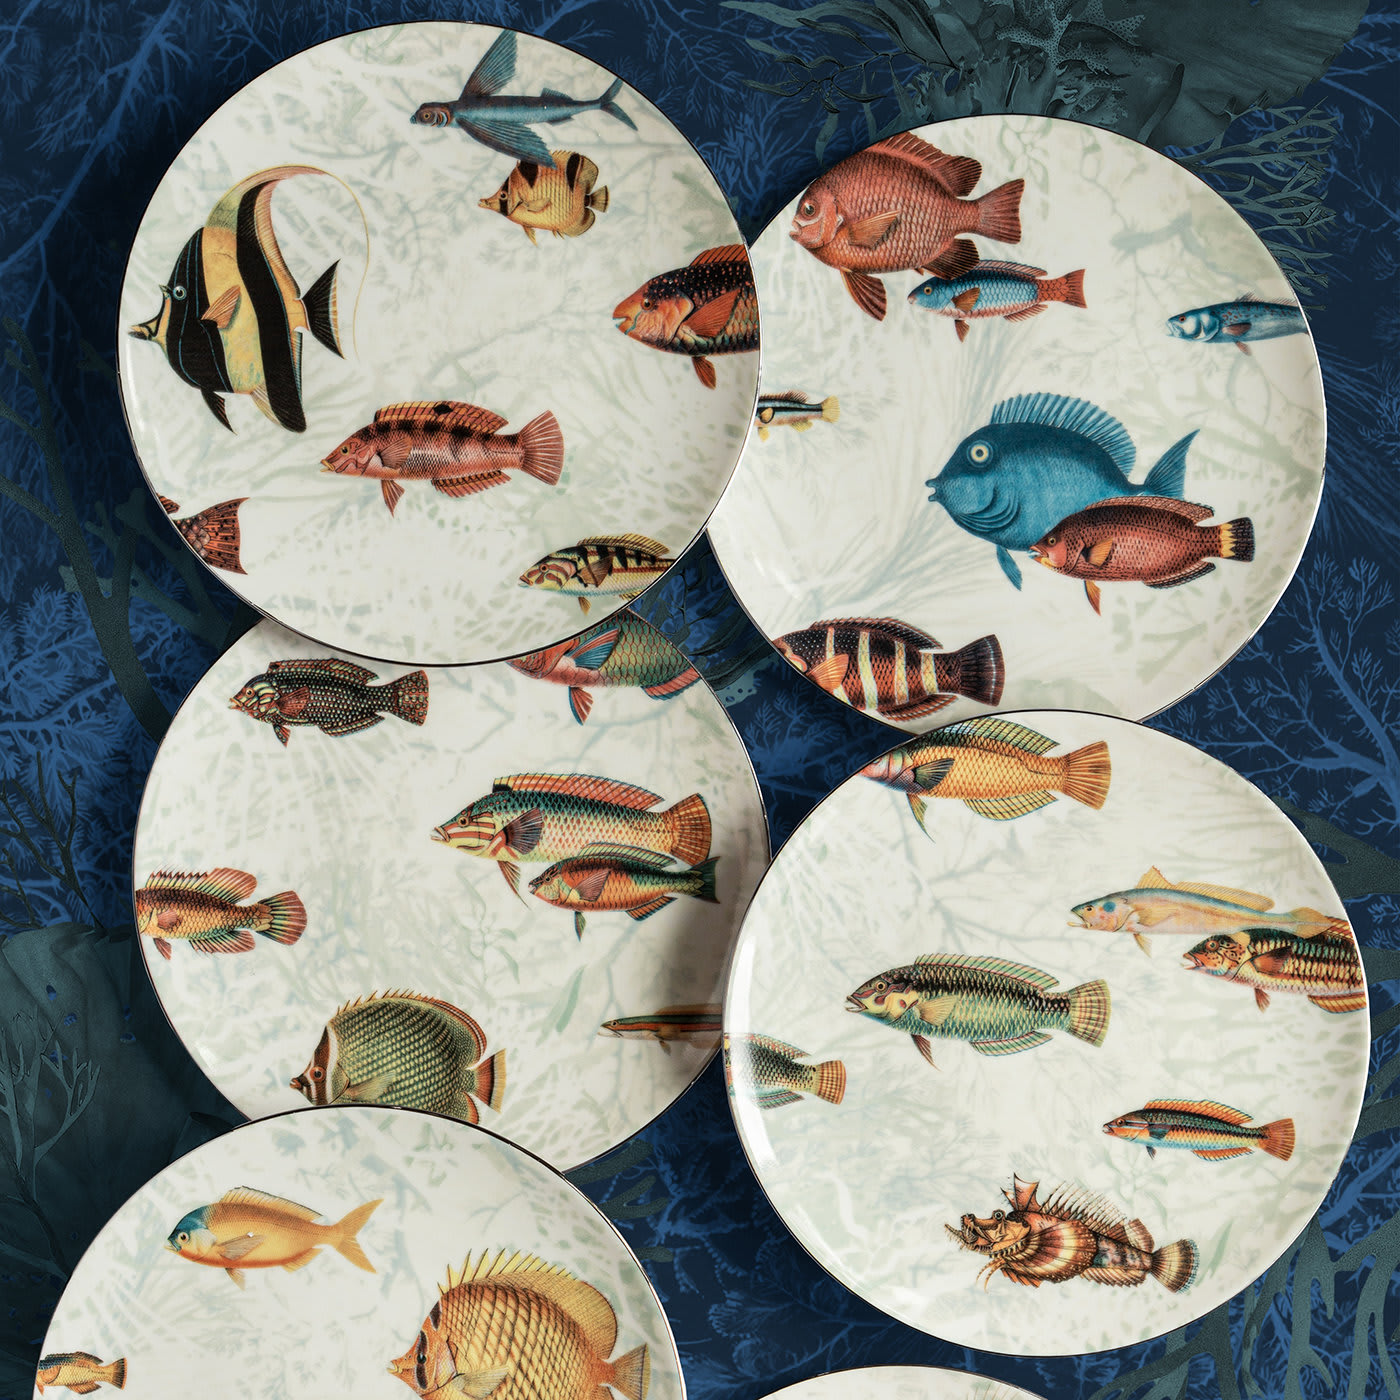 Amami Islands Blue and Red Fish Dessert Plate - Grand Tour by Vito Nesta